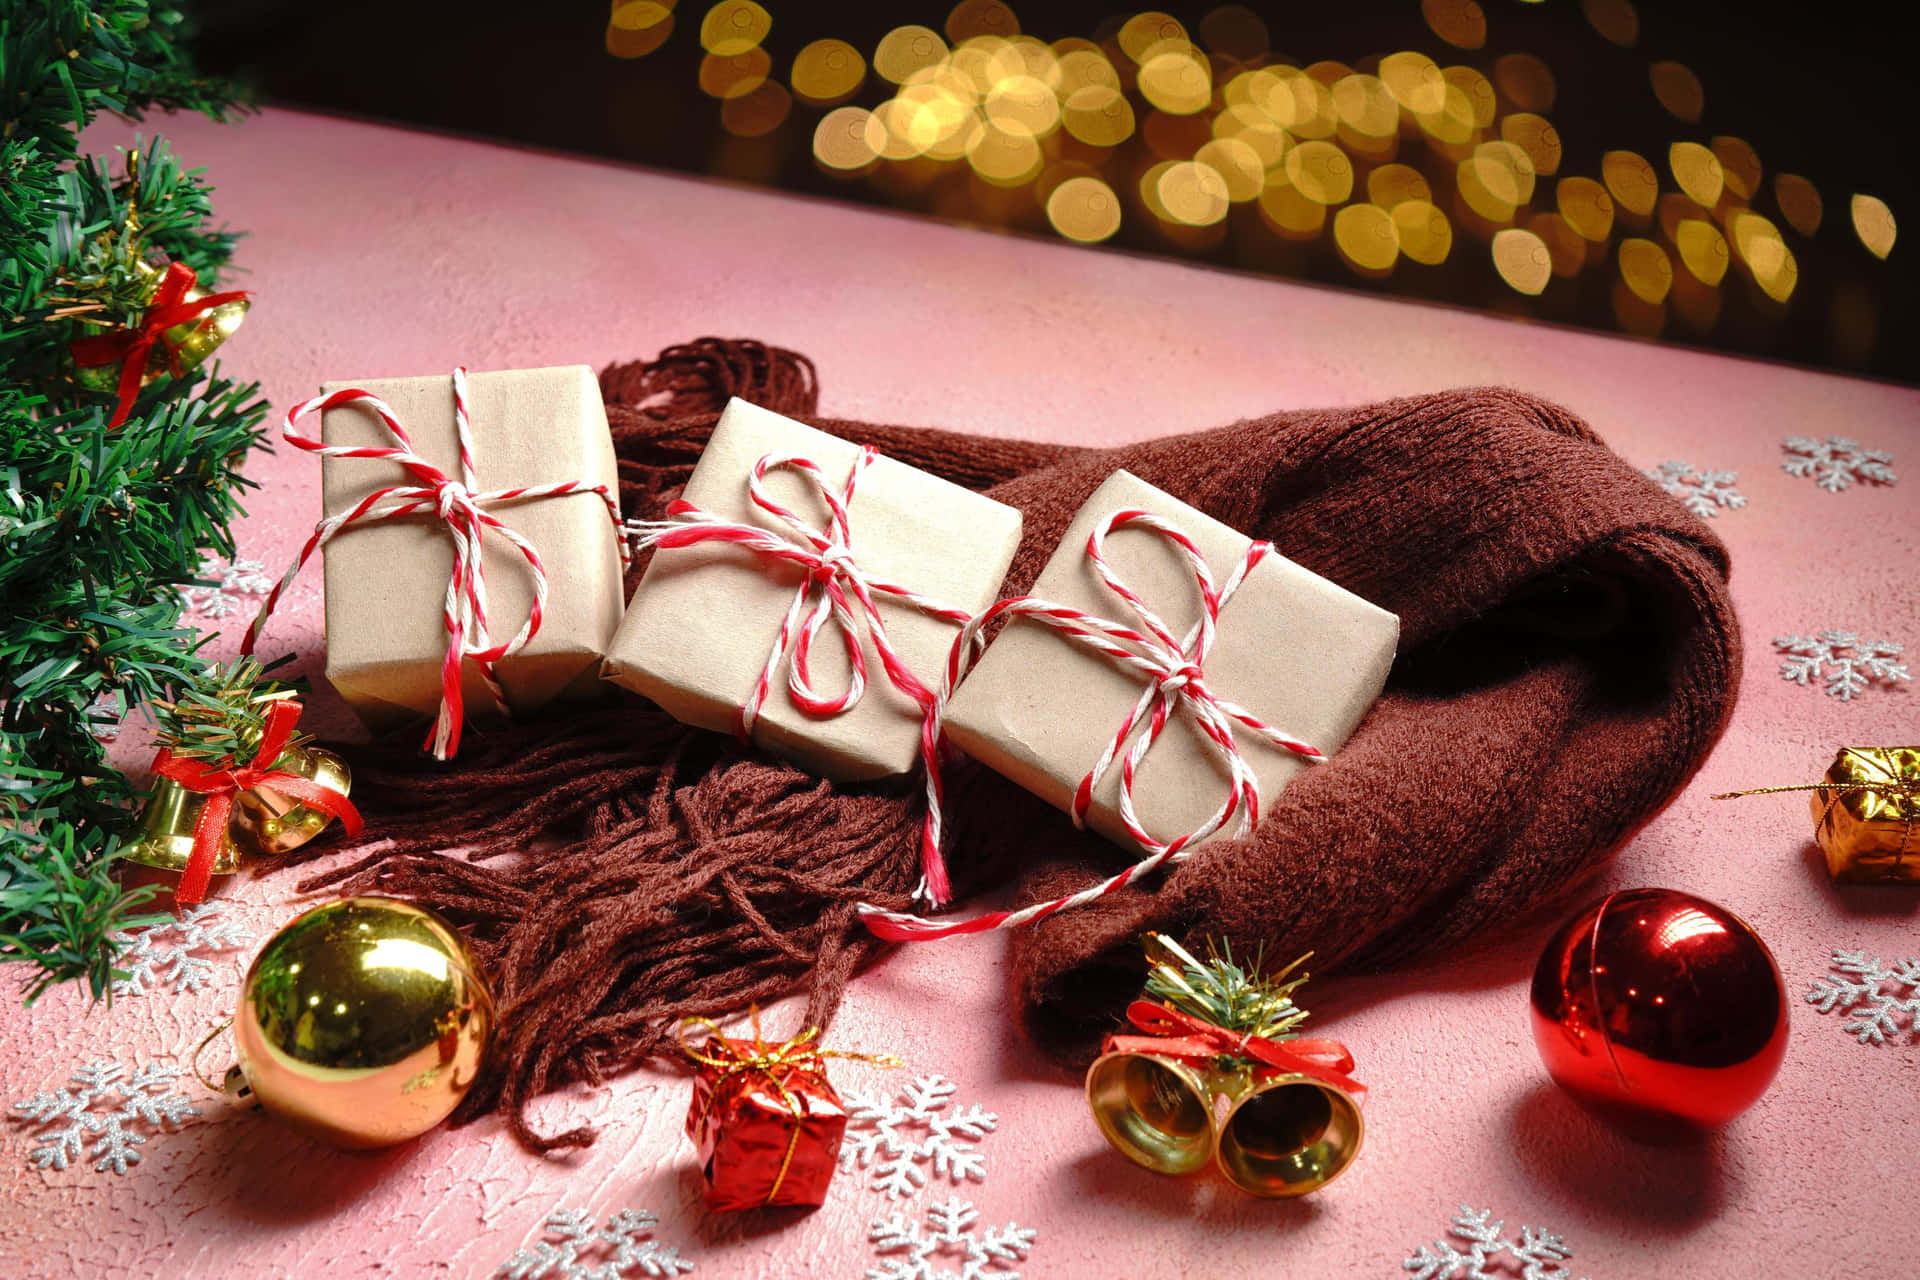 Christmas Gifts On Pink Table Picture